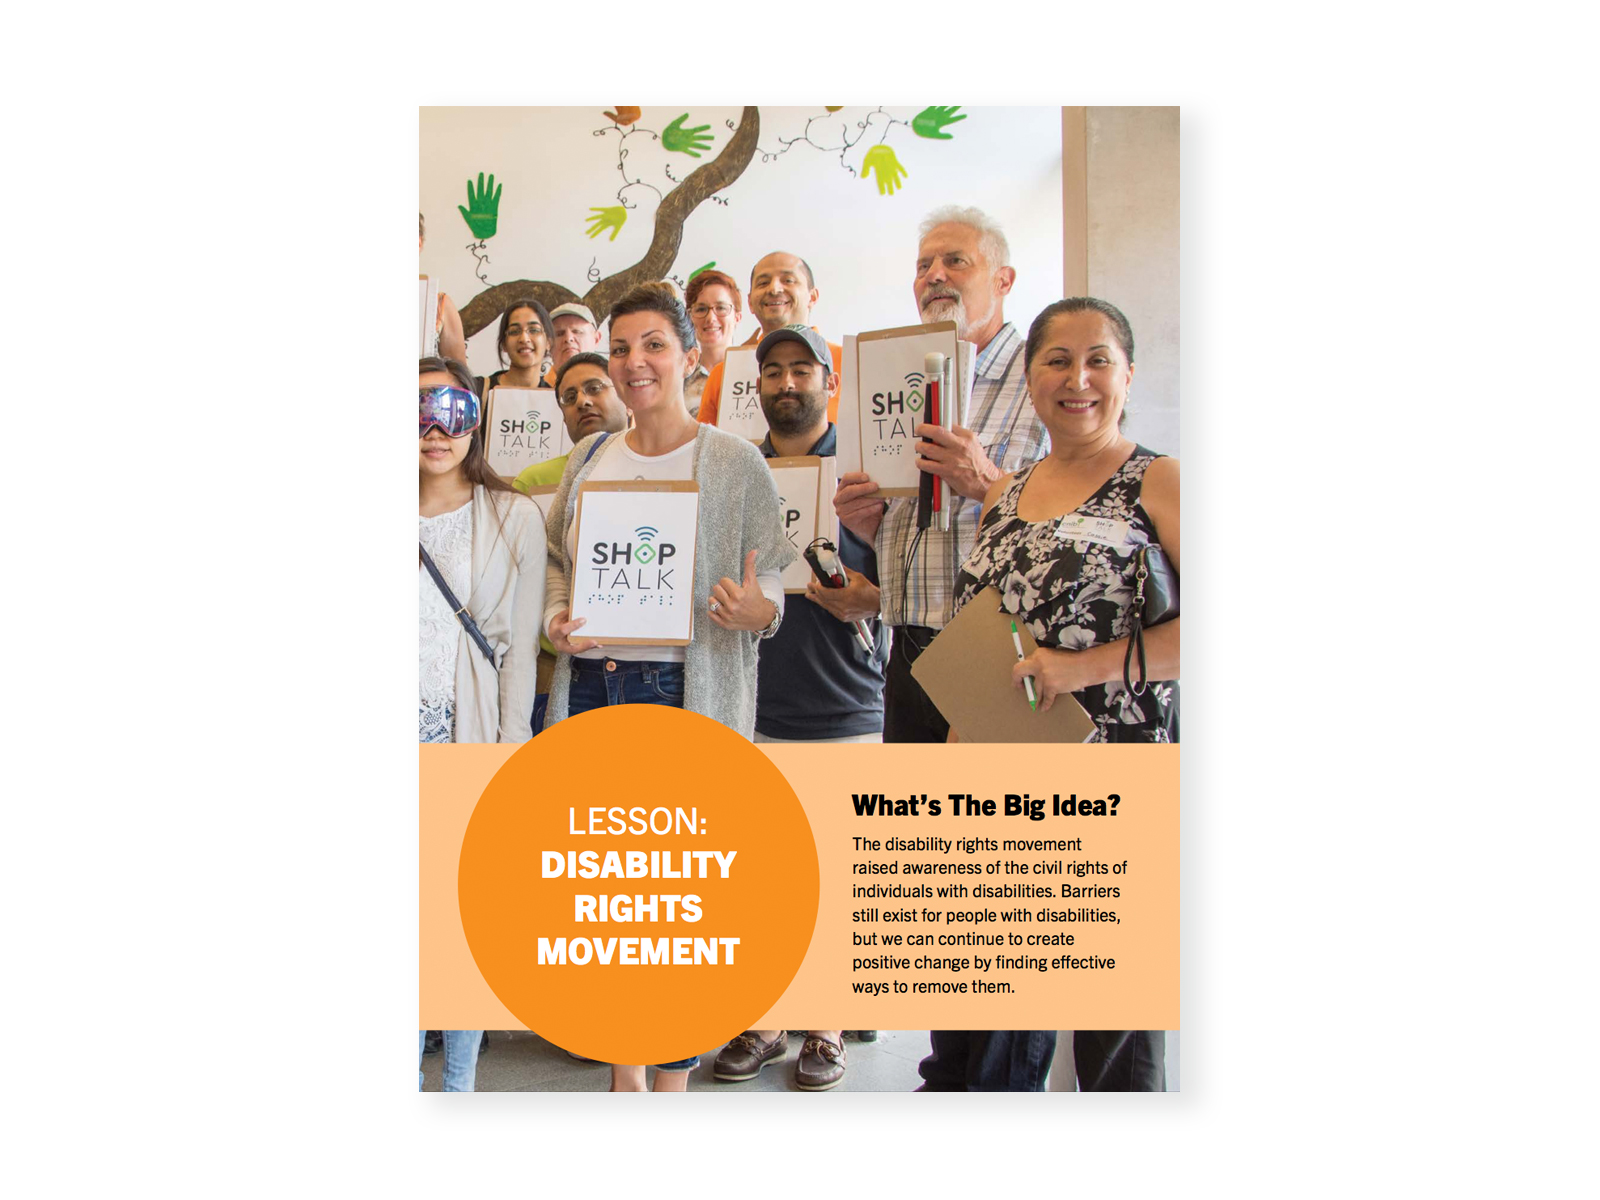 A group of people holding up signs celebrating the launch of the Shop Talk BlindSquare Enabled Neighbourhood app. Cover for "Disability Rights Movement" lesson.